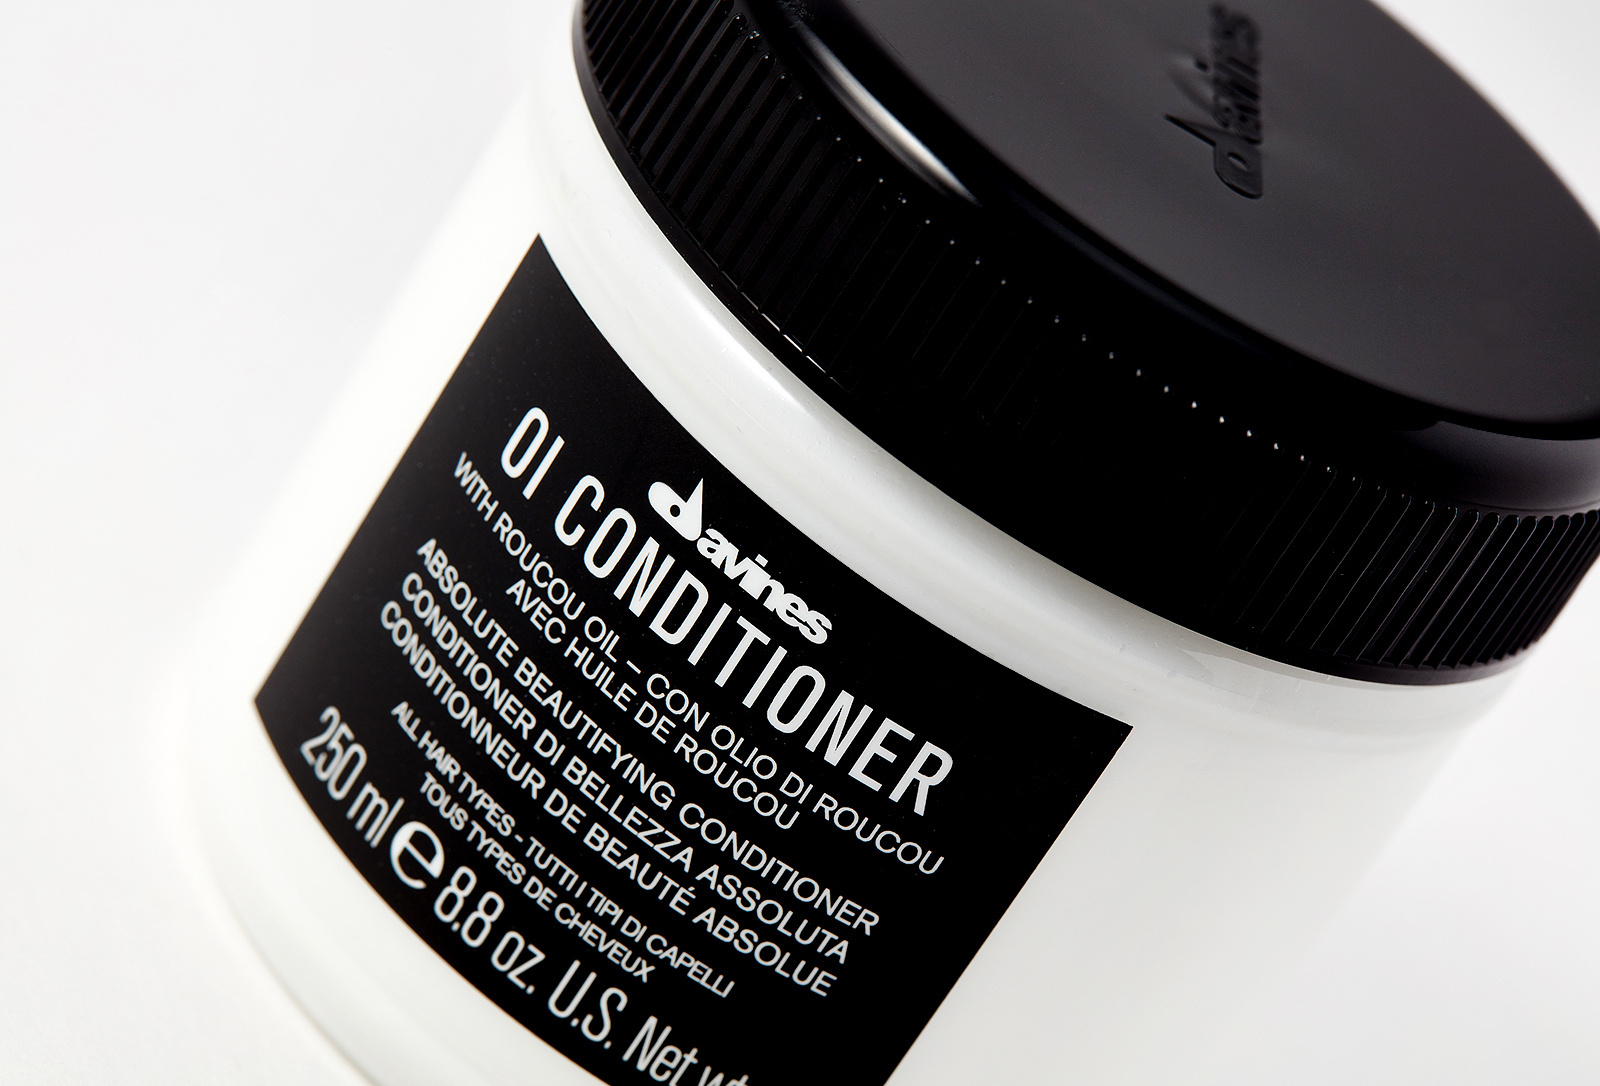 Davines oi absolute beautifying. Oi/absolute Beautifying Conditioner. Davines oi кондиционер. Davines кондиционер oi absolute Beautifying. Oi/absolute Beautifying Conditioner - кондиционер для абсолютной красоты волос.